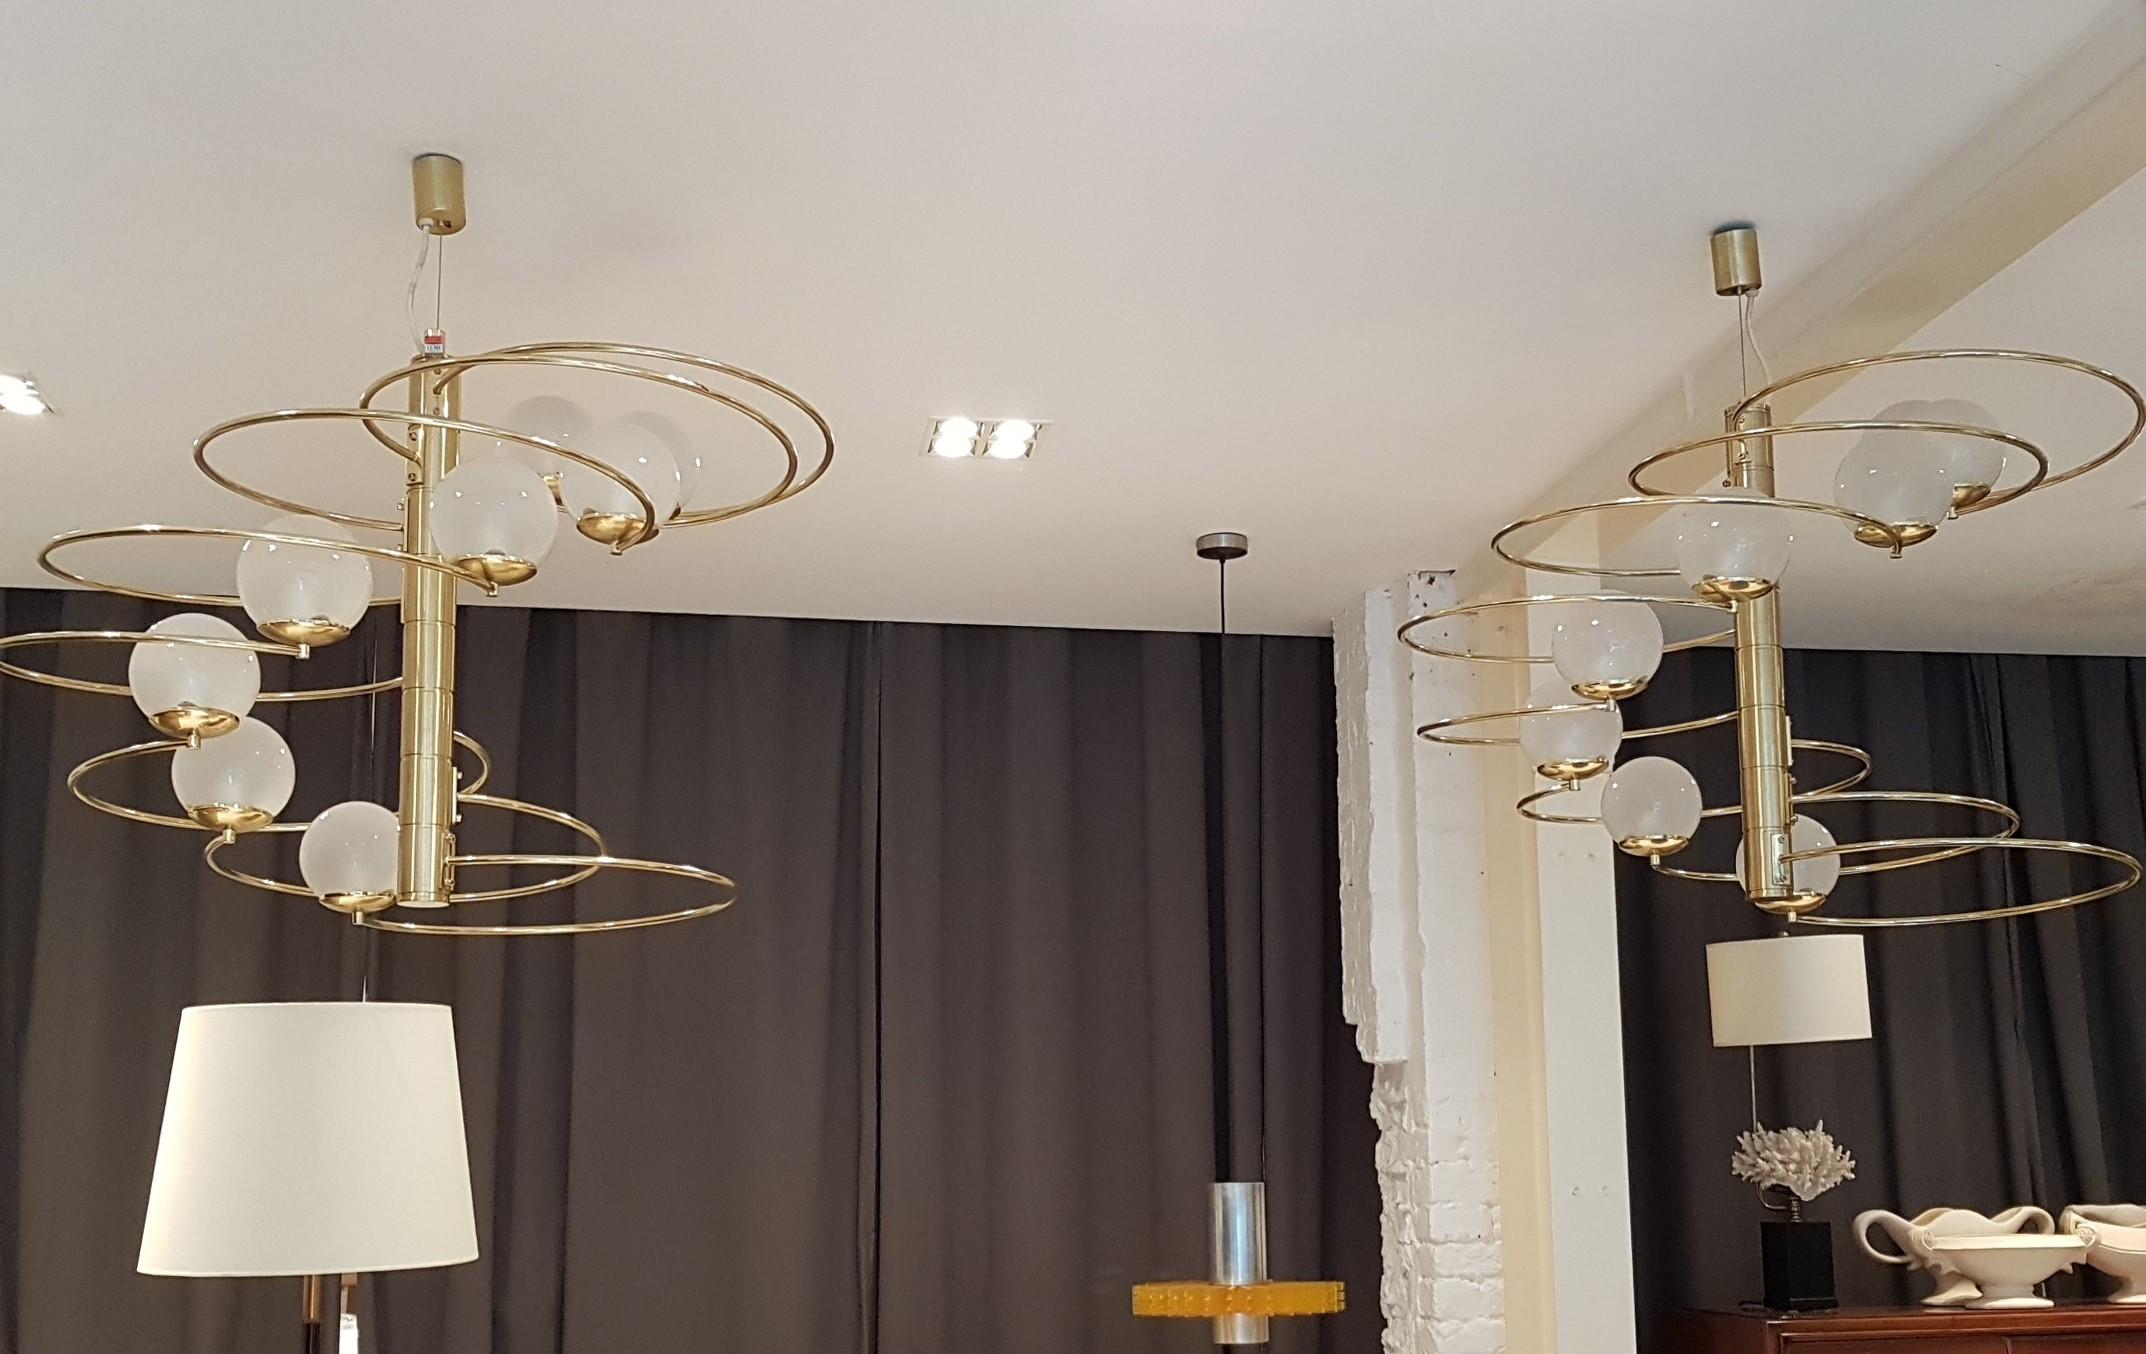 A pair of elegant Italian sculptural chandeliers designed by Pia Guidetti Crippa for Lumi, Milan, circa 1960s Italy, label to stem. These chandeliers have a brass stem with eight opaque glass shades on each chandelier. Makers label to stem.